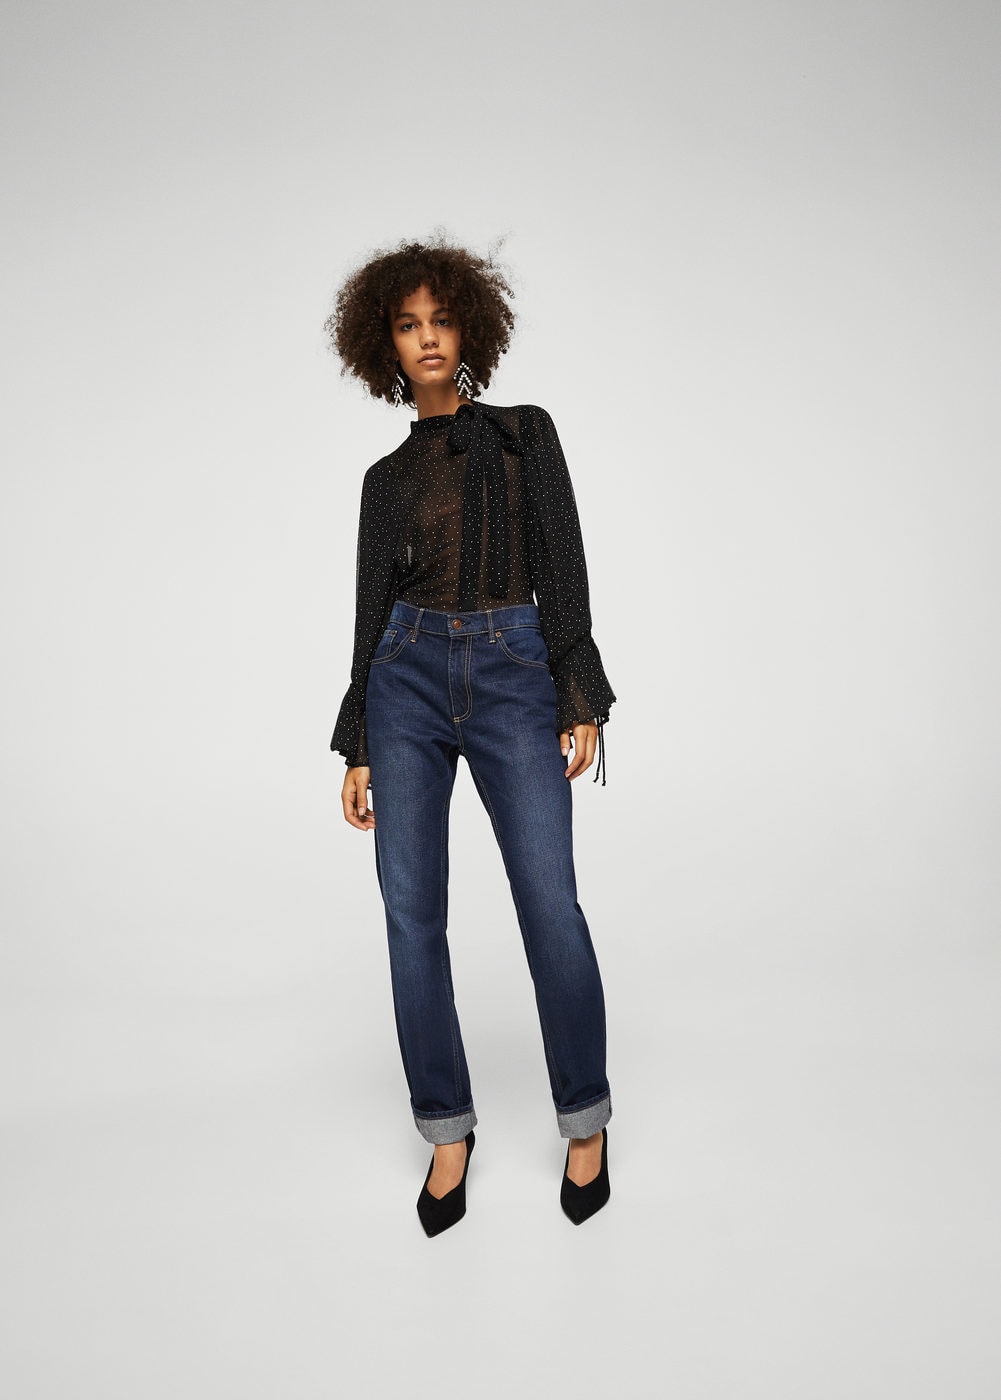 Make a statement with this flared sleeve blouse from Mango.